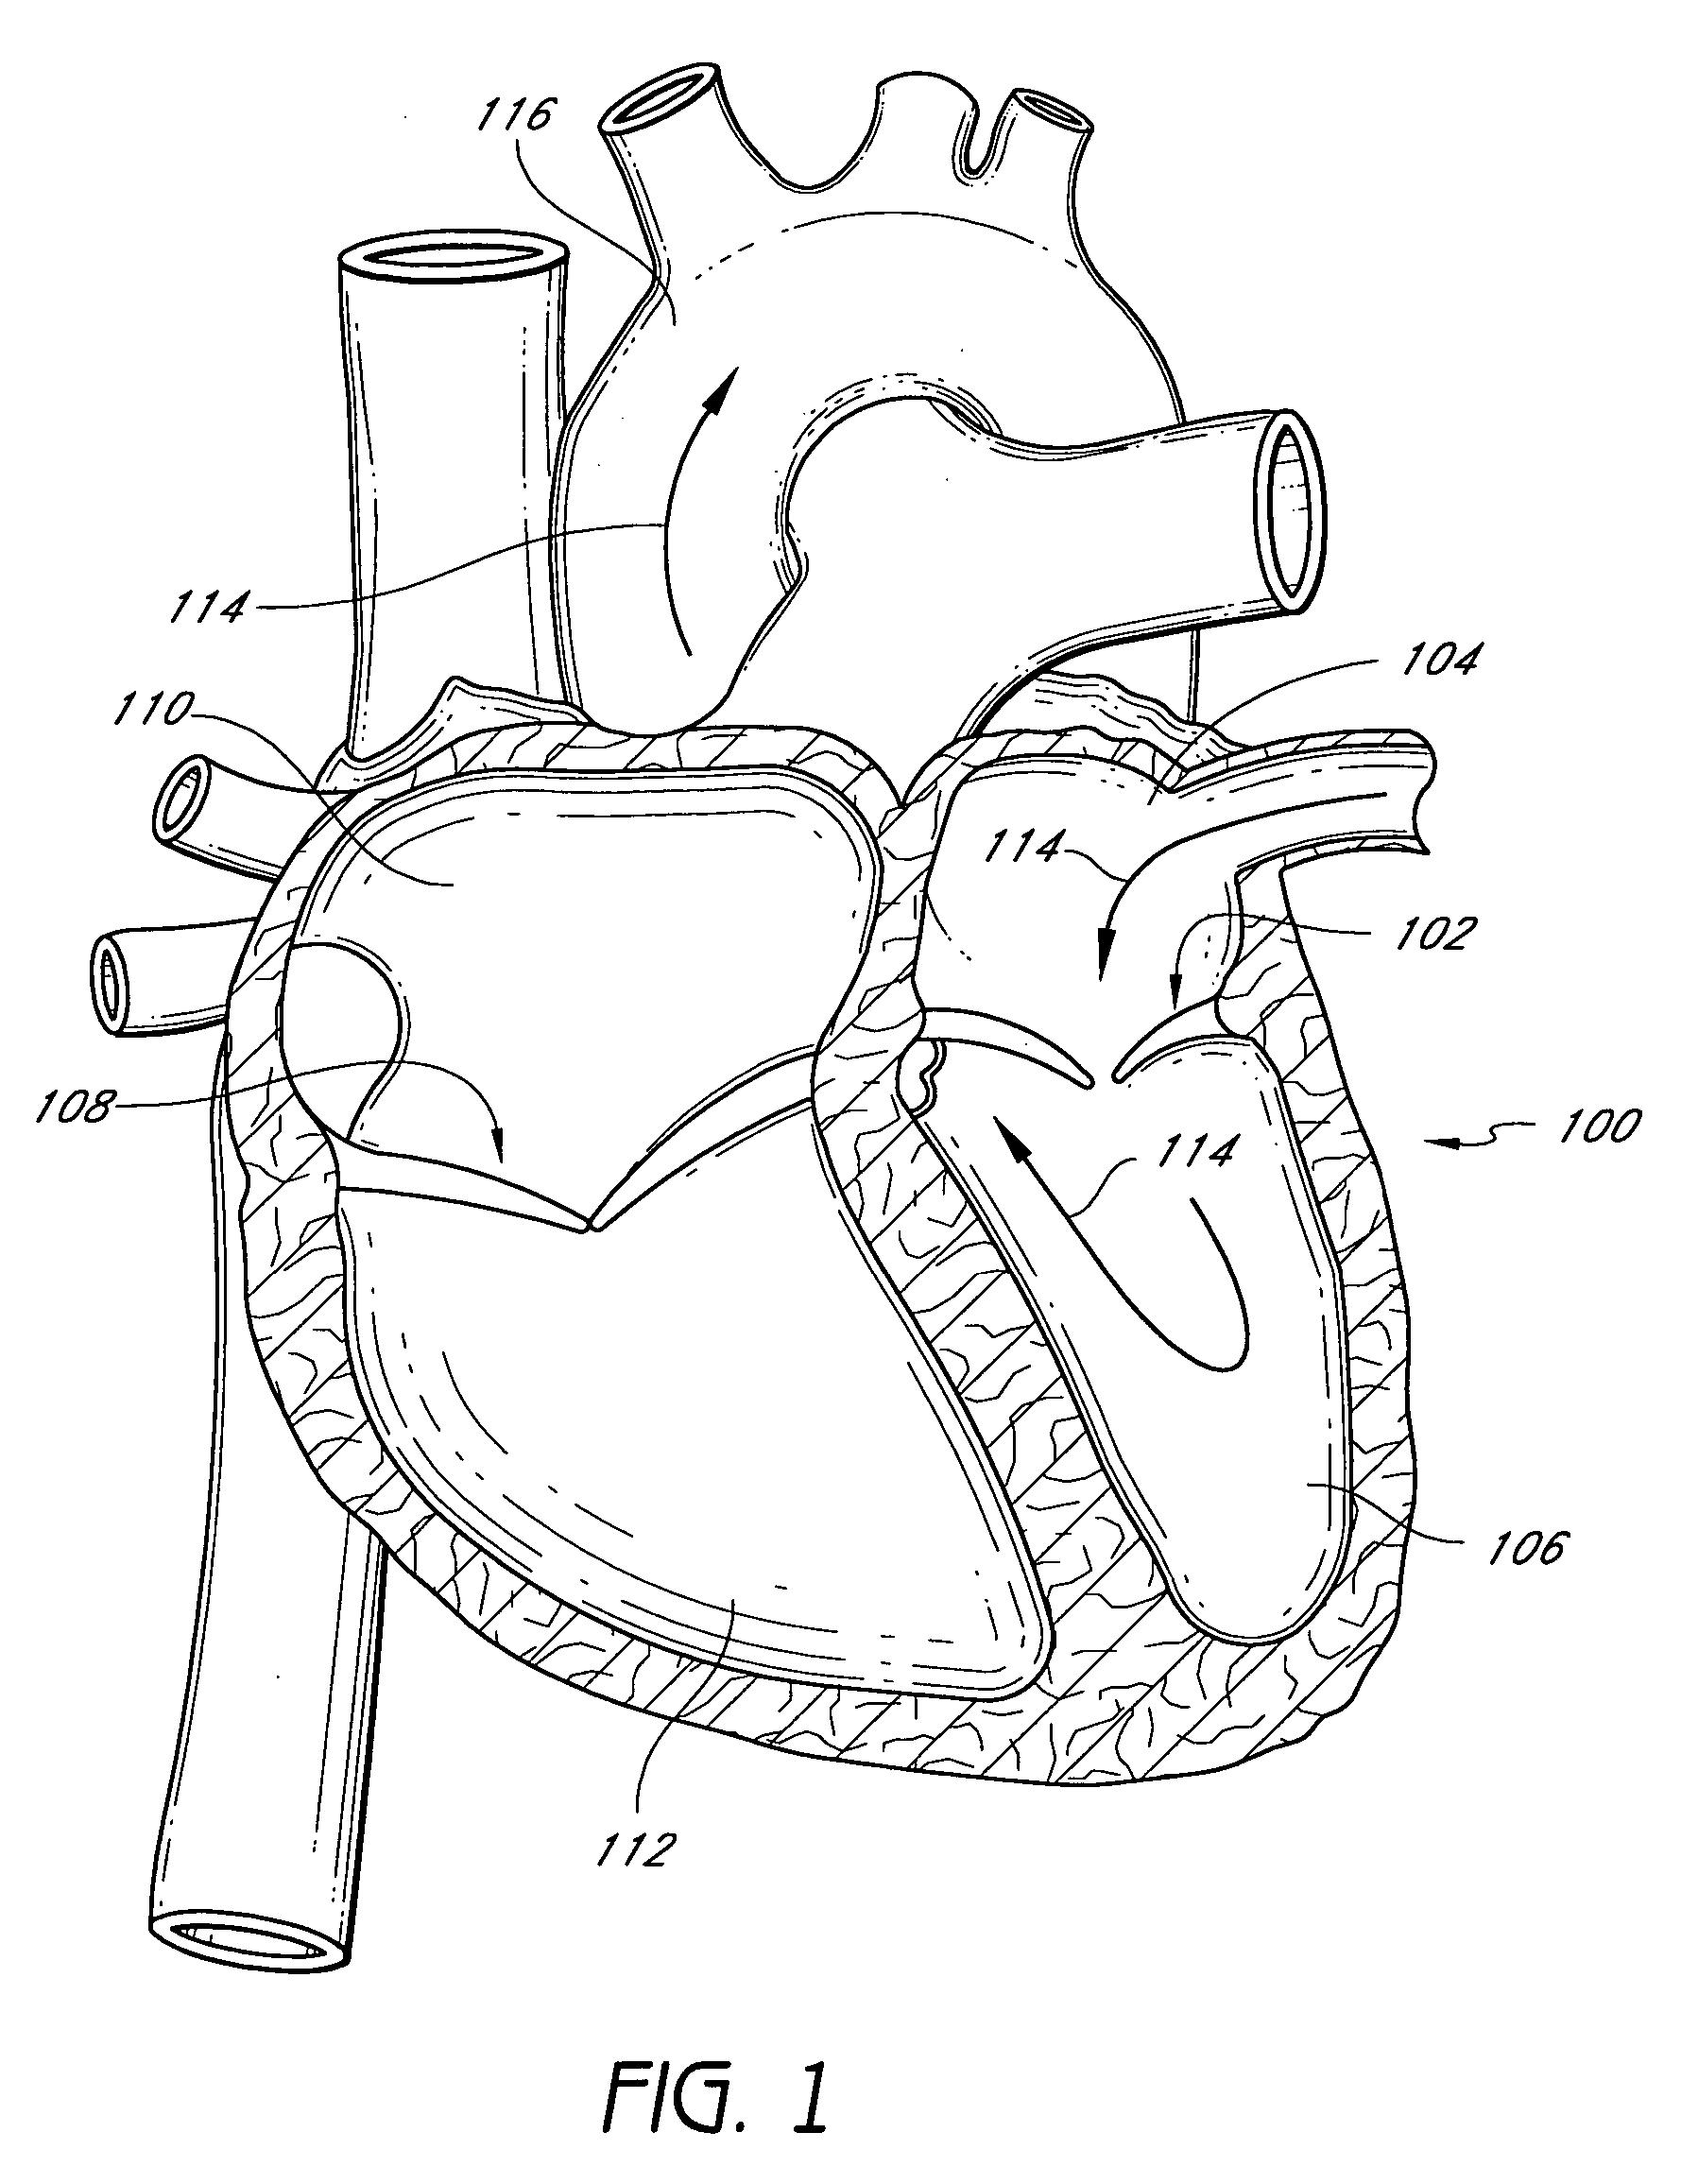 Implants and methods for reshaping heart valves